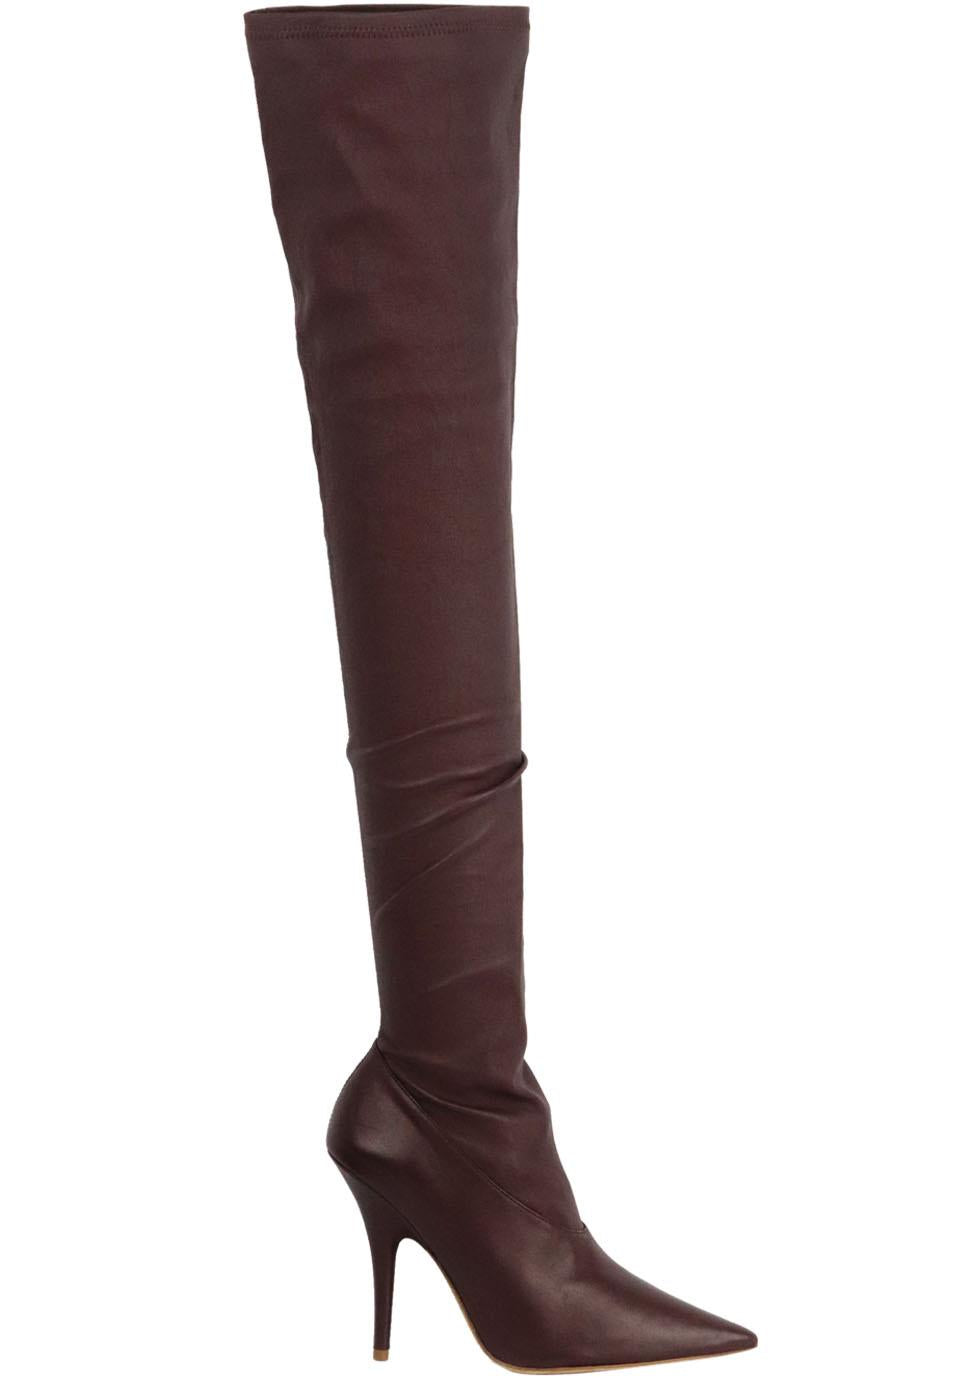 YEEZY SEASON 5 STRETCH LEATHER OVER THE KNEE BOOTS EU 39 UK 6 US 9